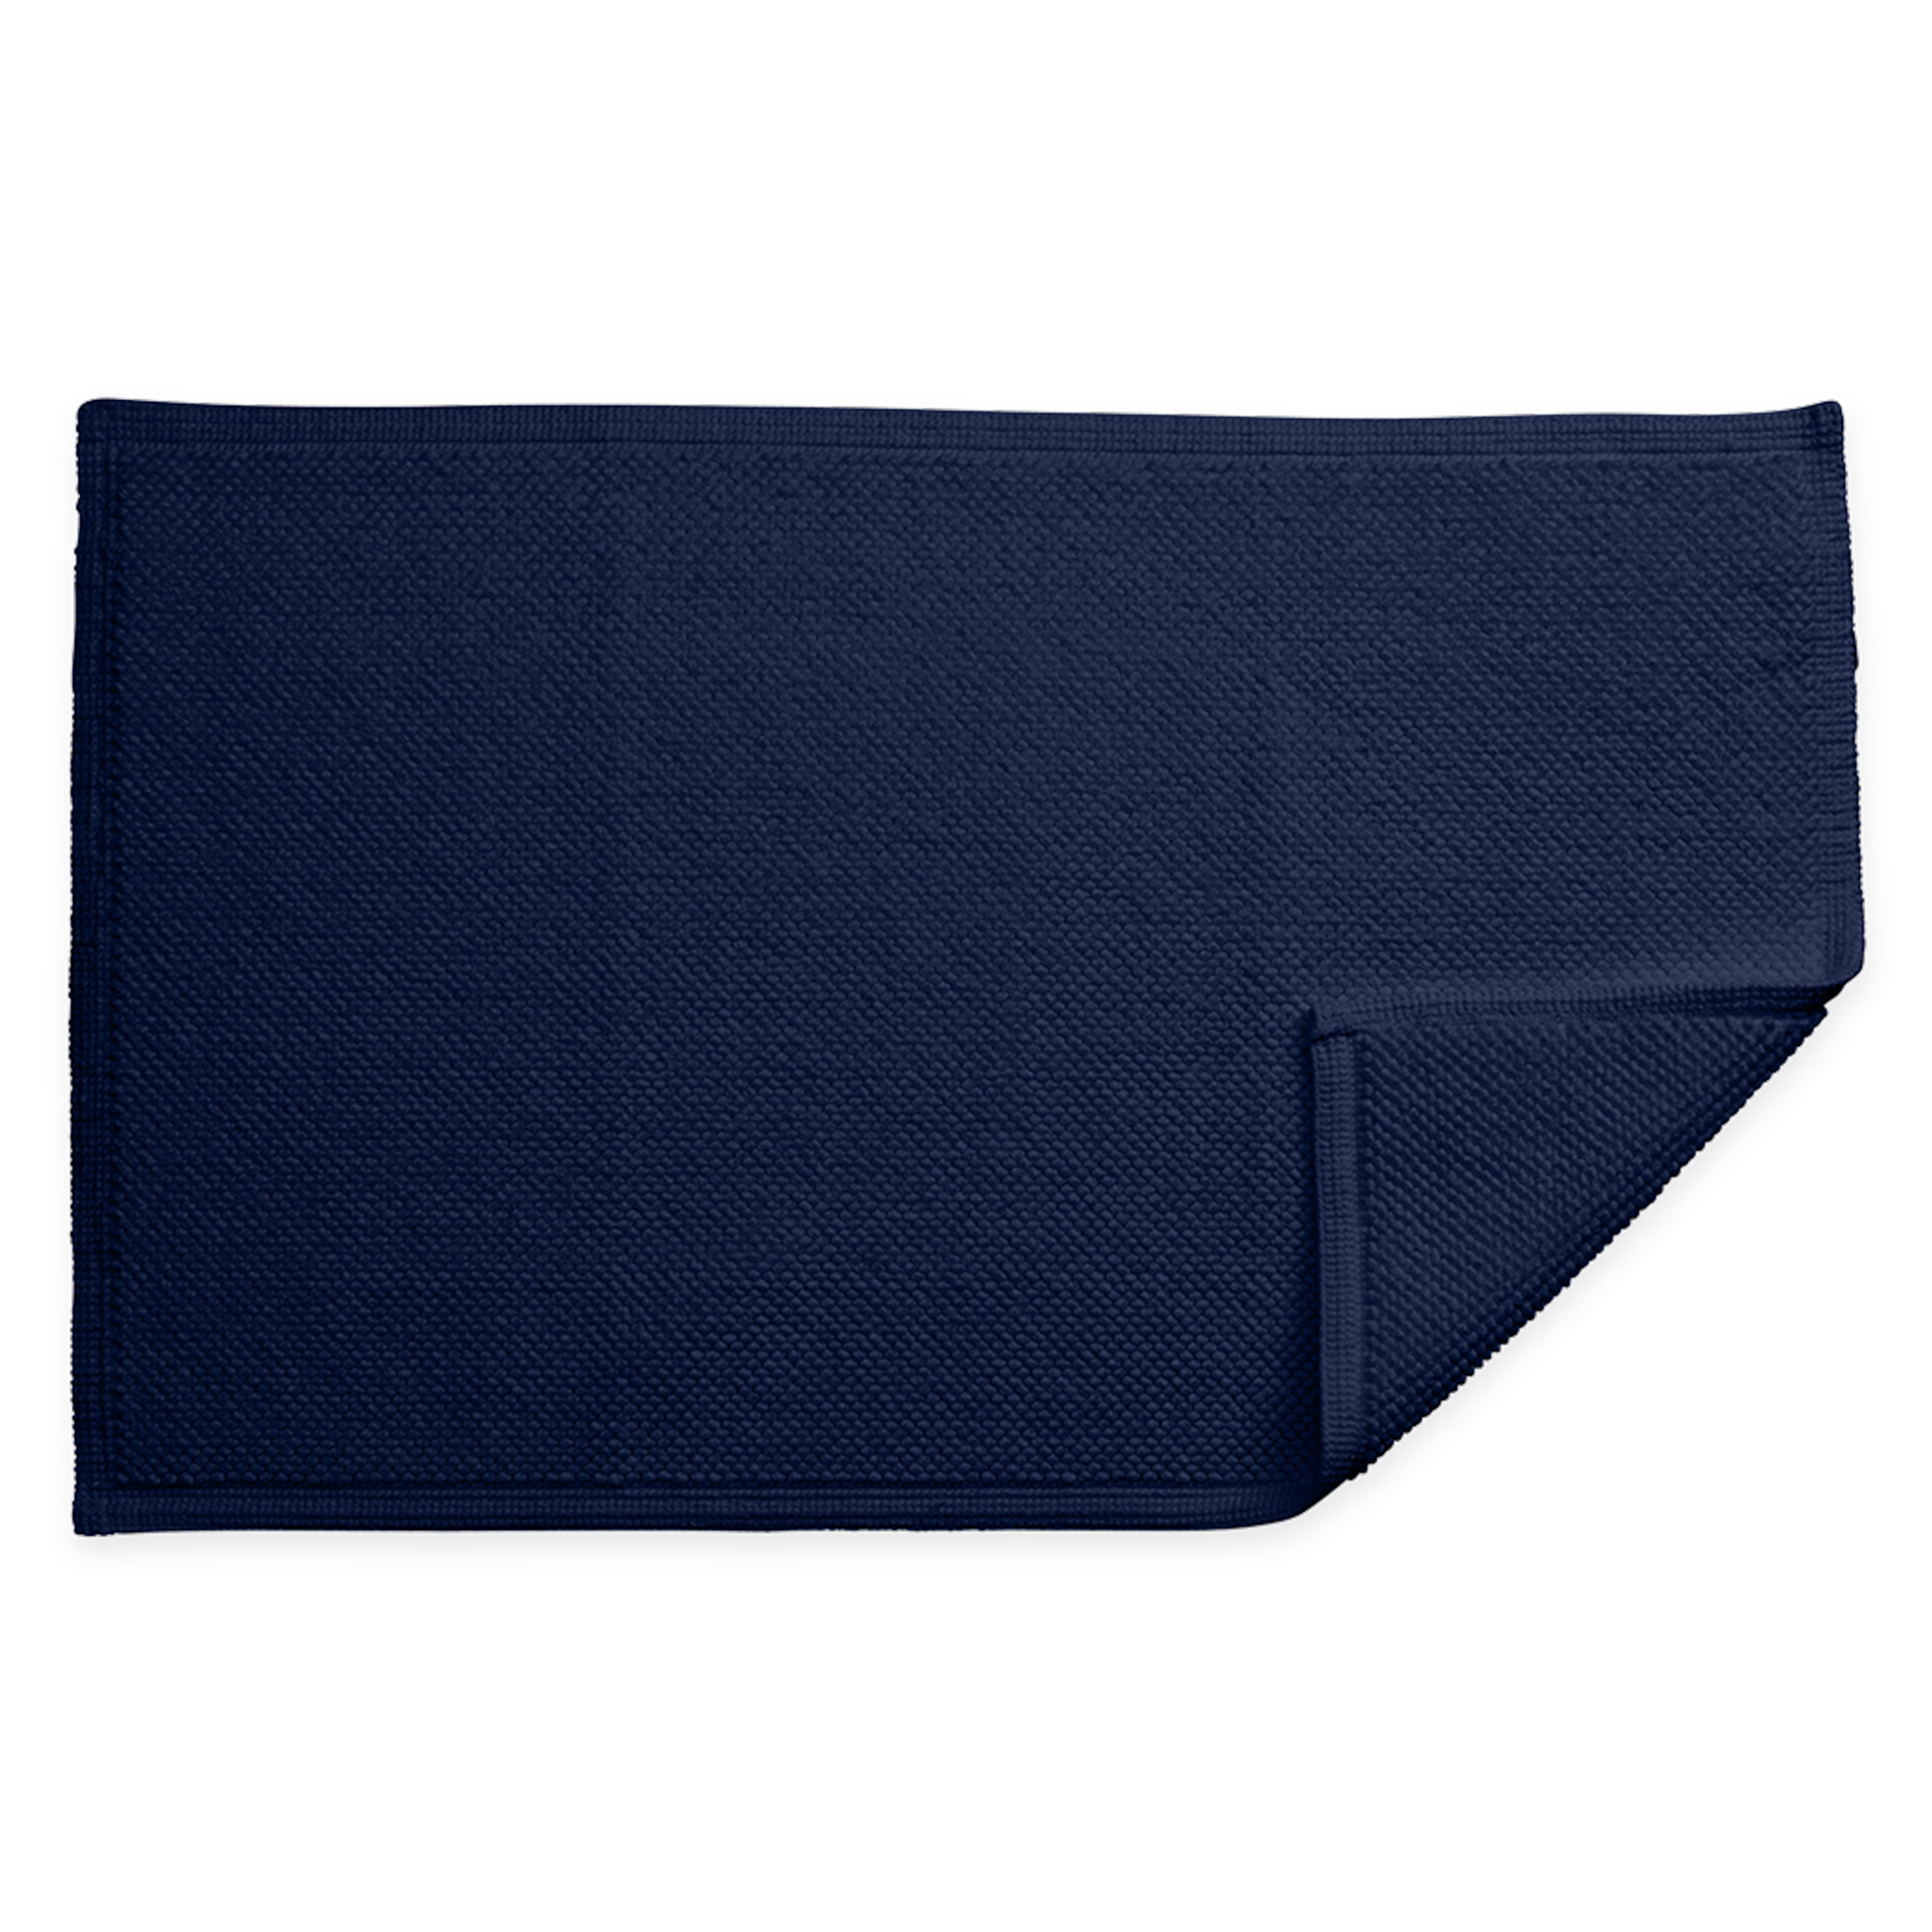 Silo Image of Matouk Reverie Bath Rugs in Color Navy